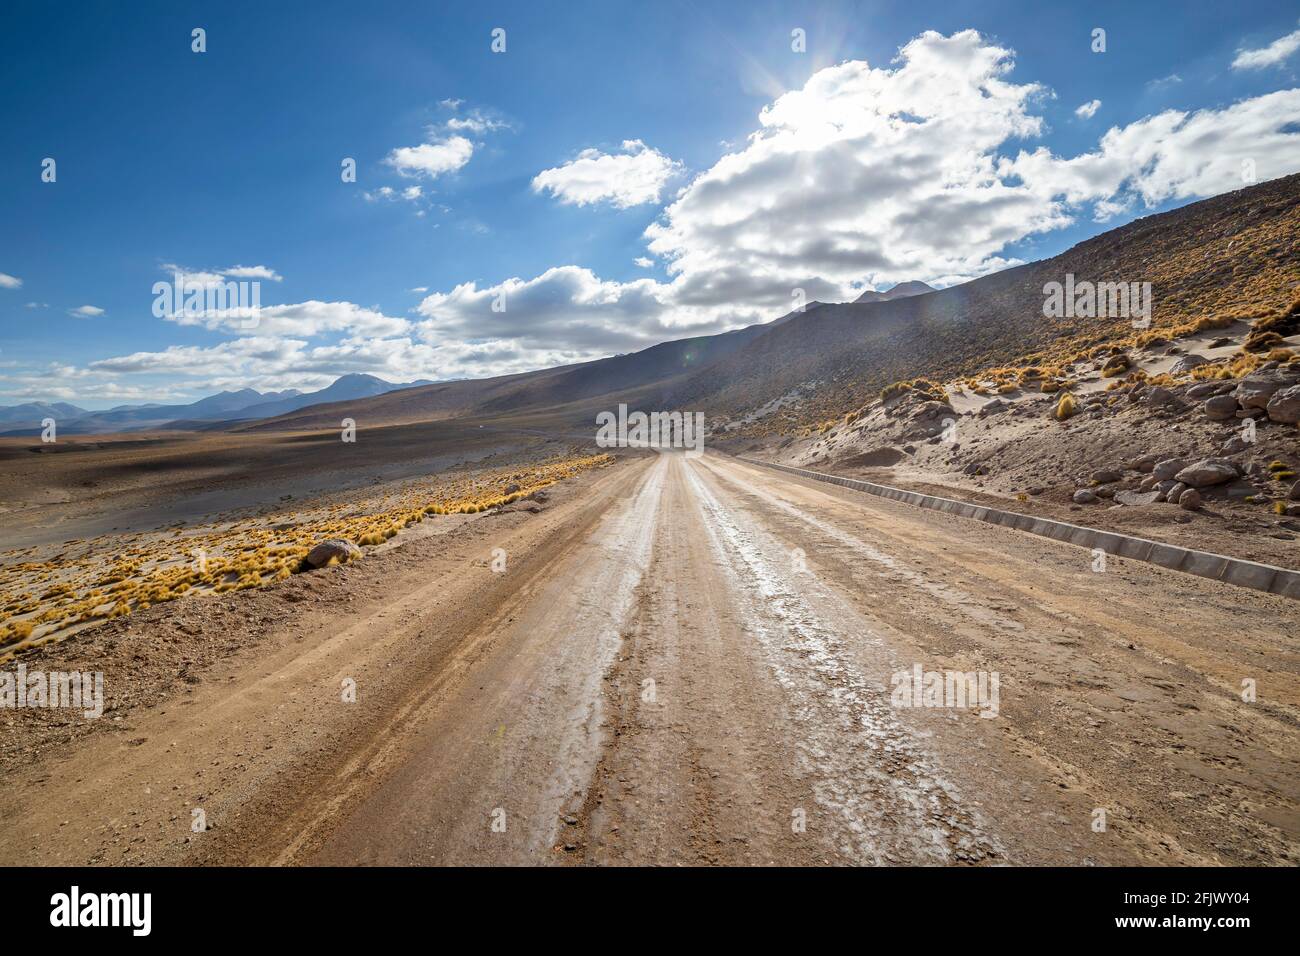 View from the Route B 245 at sunrise, a scenic road in the north of Chile. The road runs from San Pedro de Atacama to El Tatio Geysers, near the borde Stock Photo